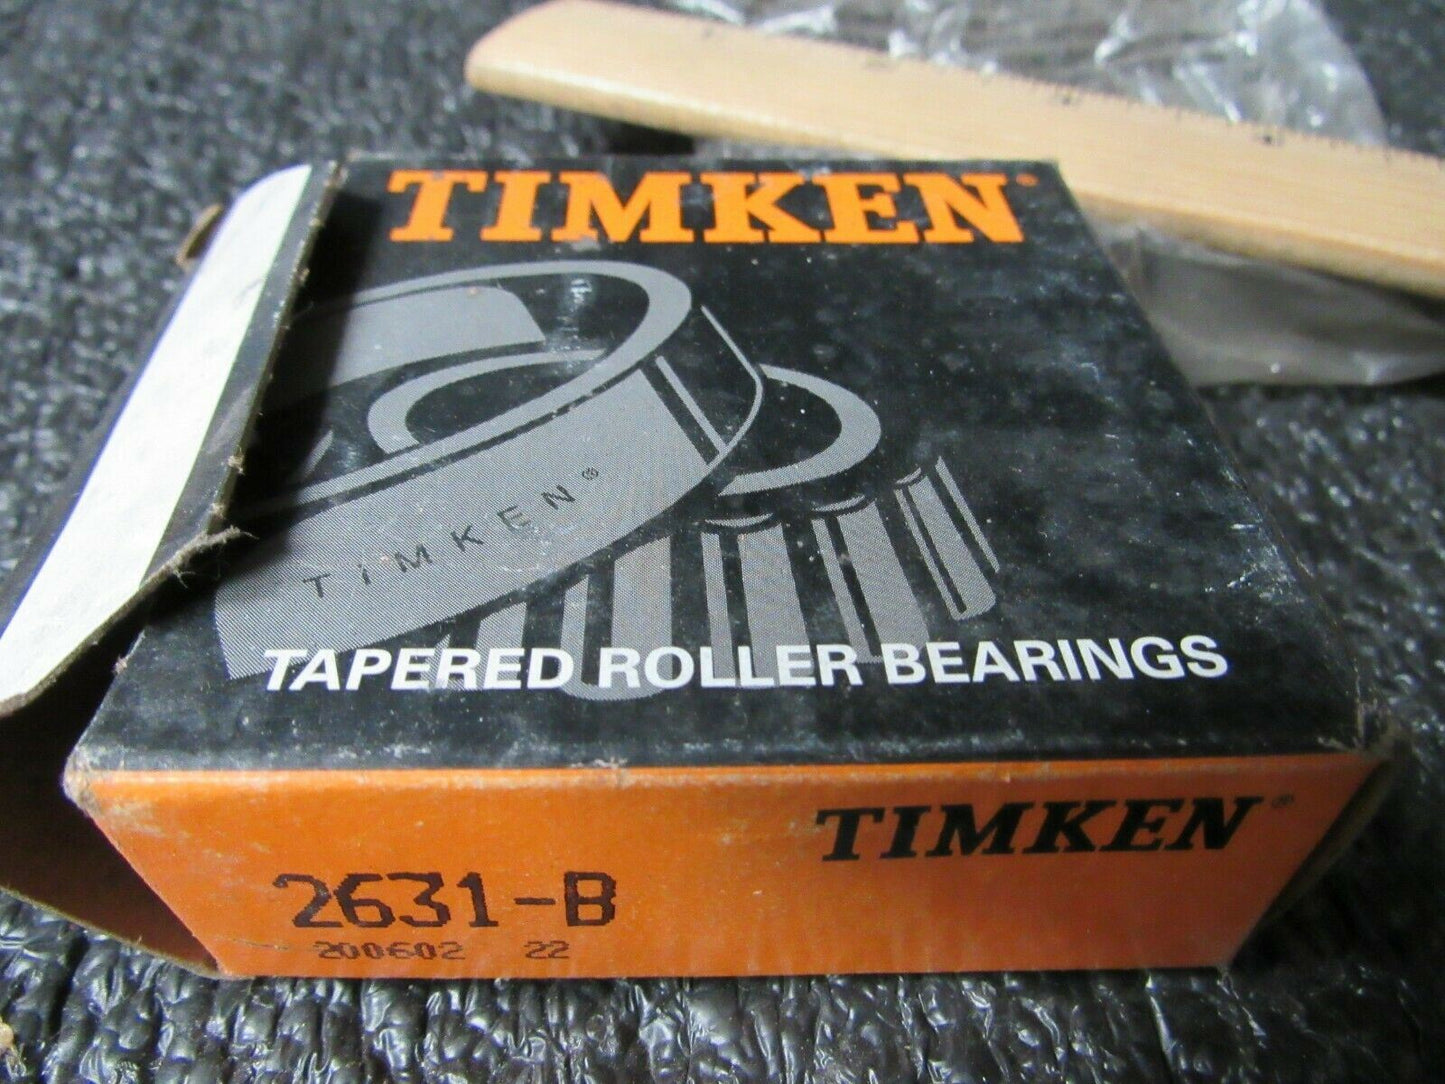 TIMKEN, TAPERED ROLLER BEARING CUP 2631B, 2.615" OD 3/4" W, 2.767: FLANGE OD (184209345039-BT32)